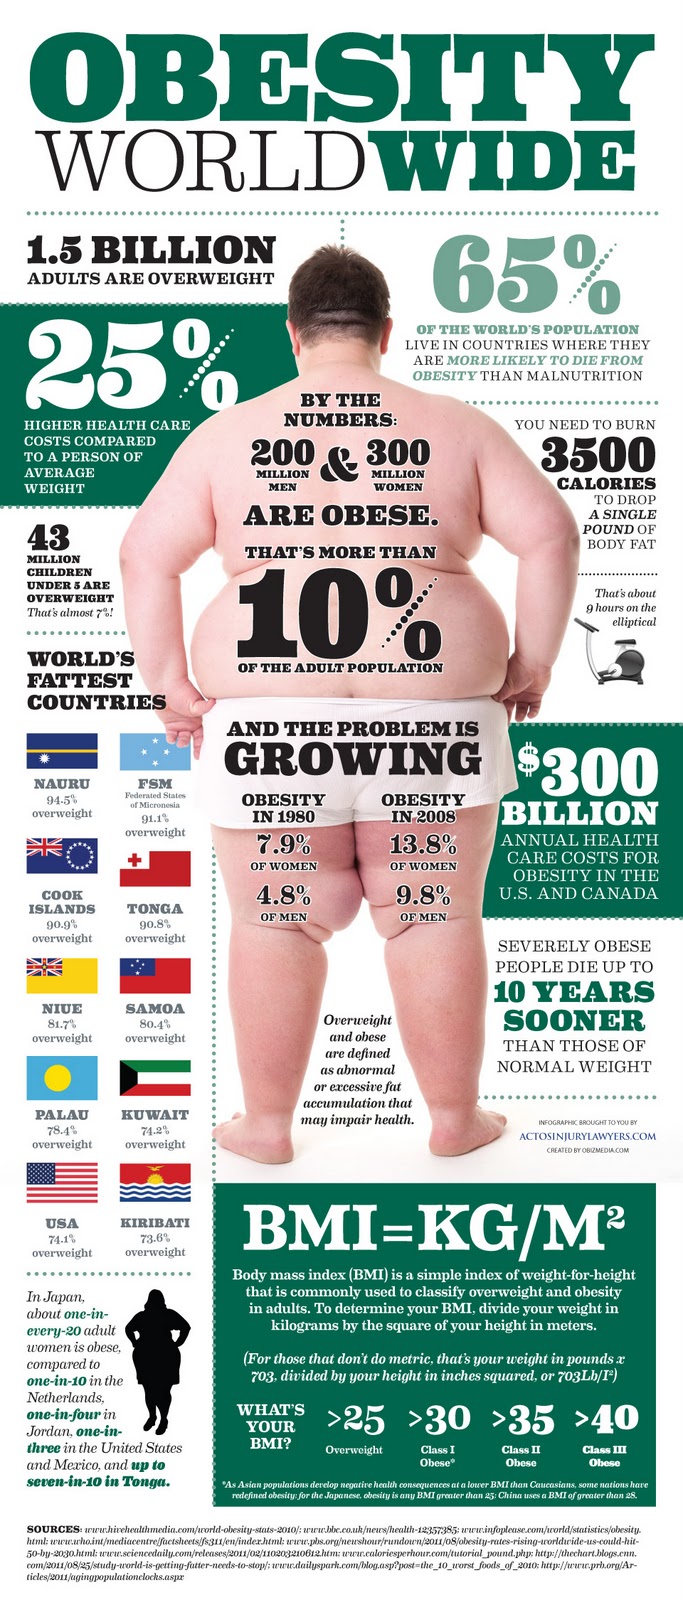 obesity-infographic-worldwide-aibob-from